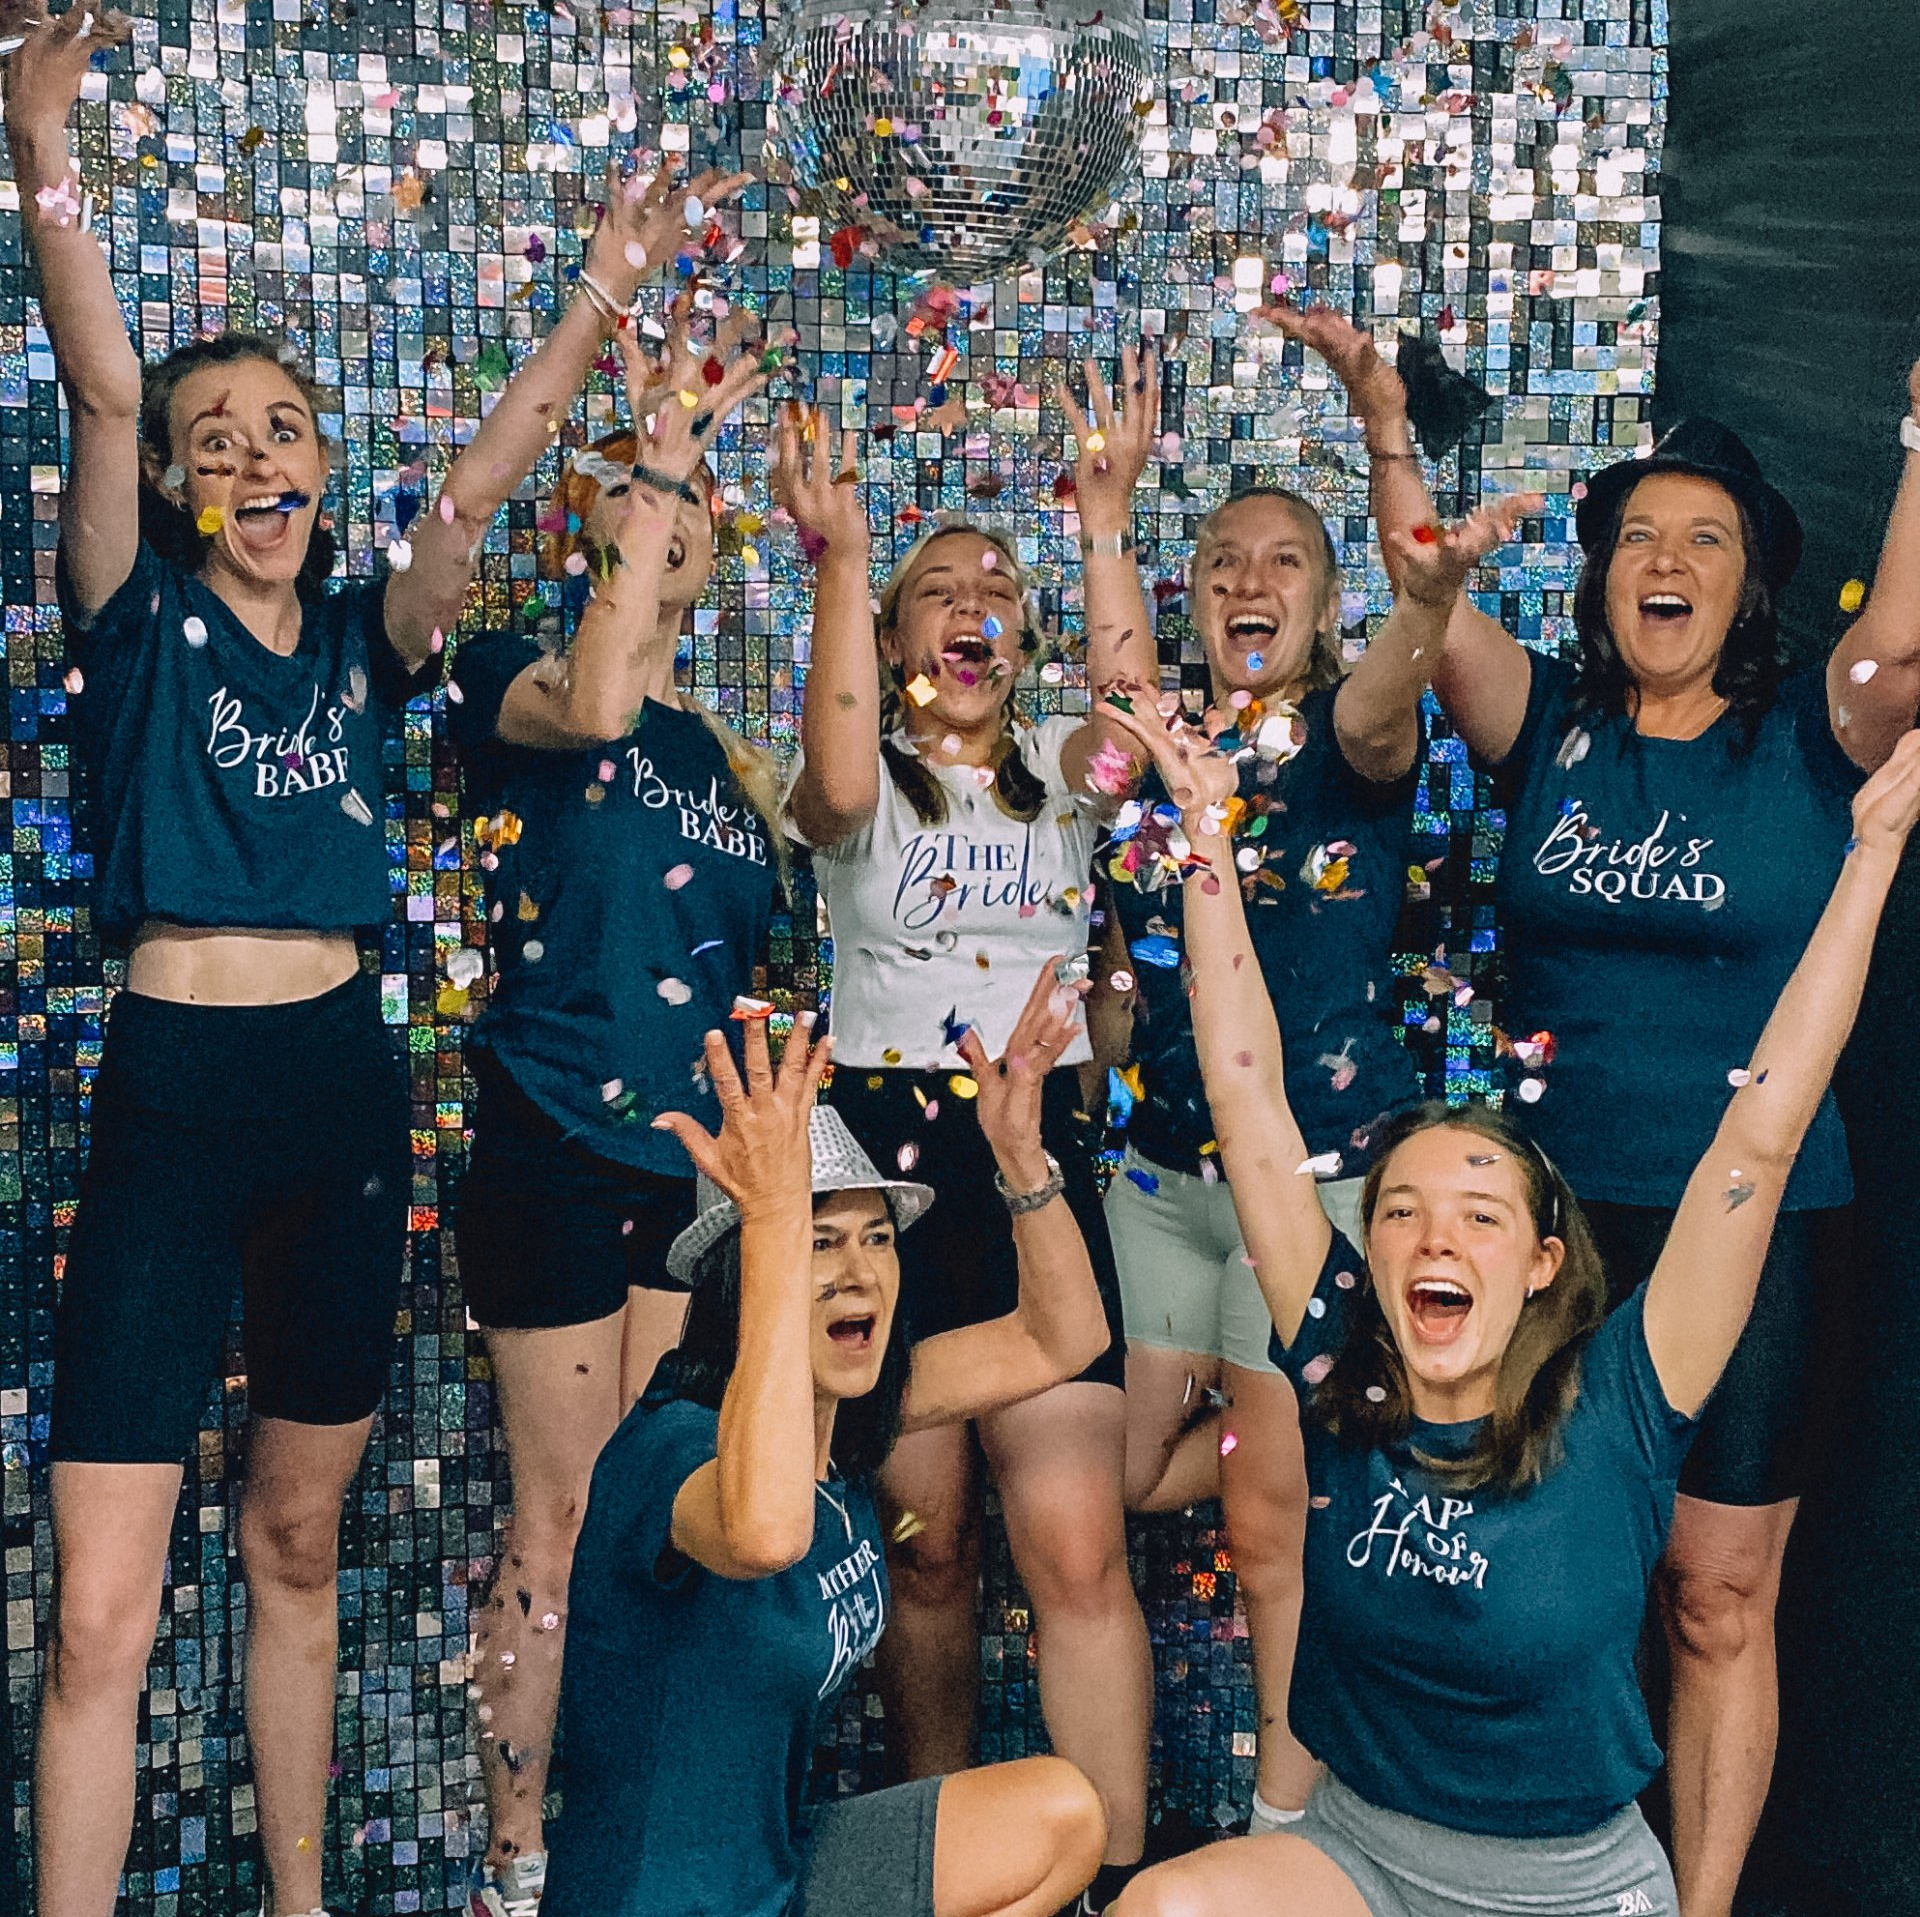 Group of girls throwing confetti in celebratory shout